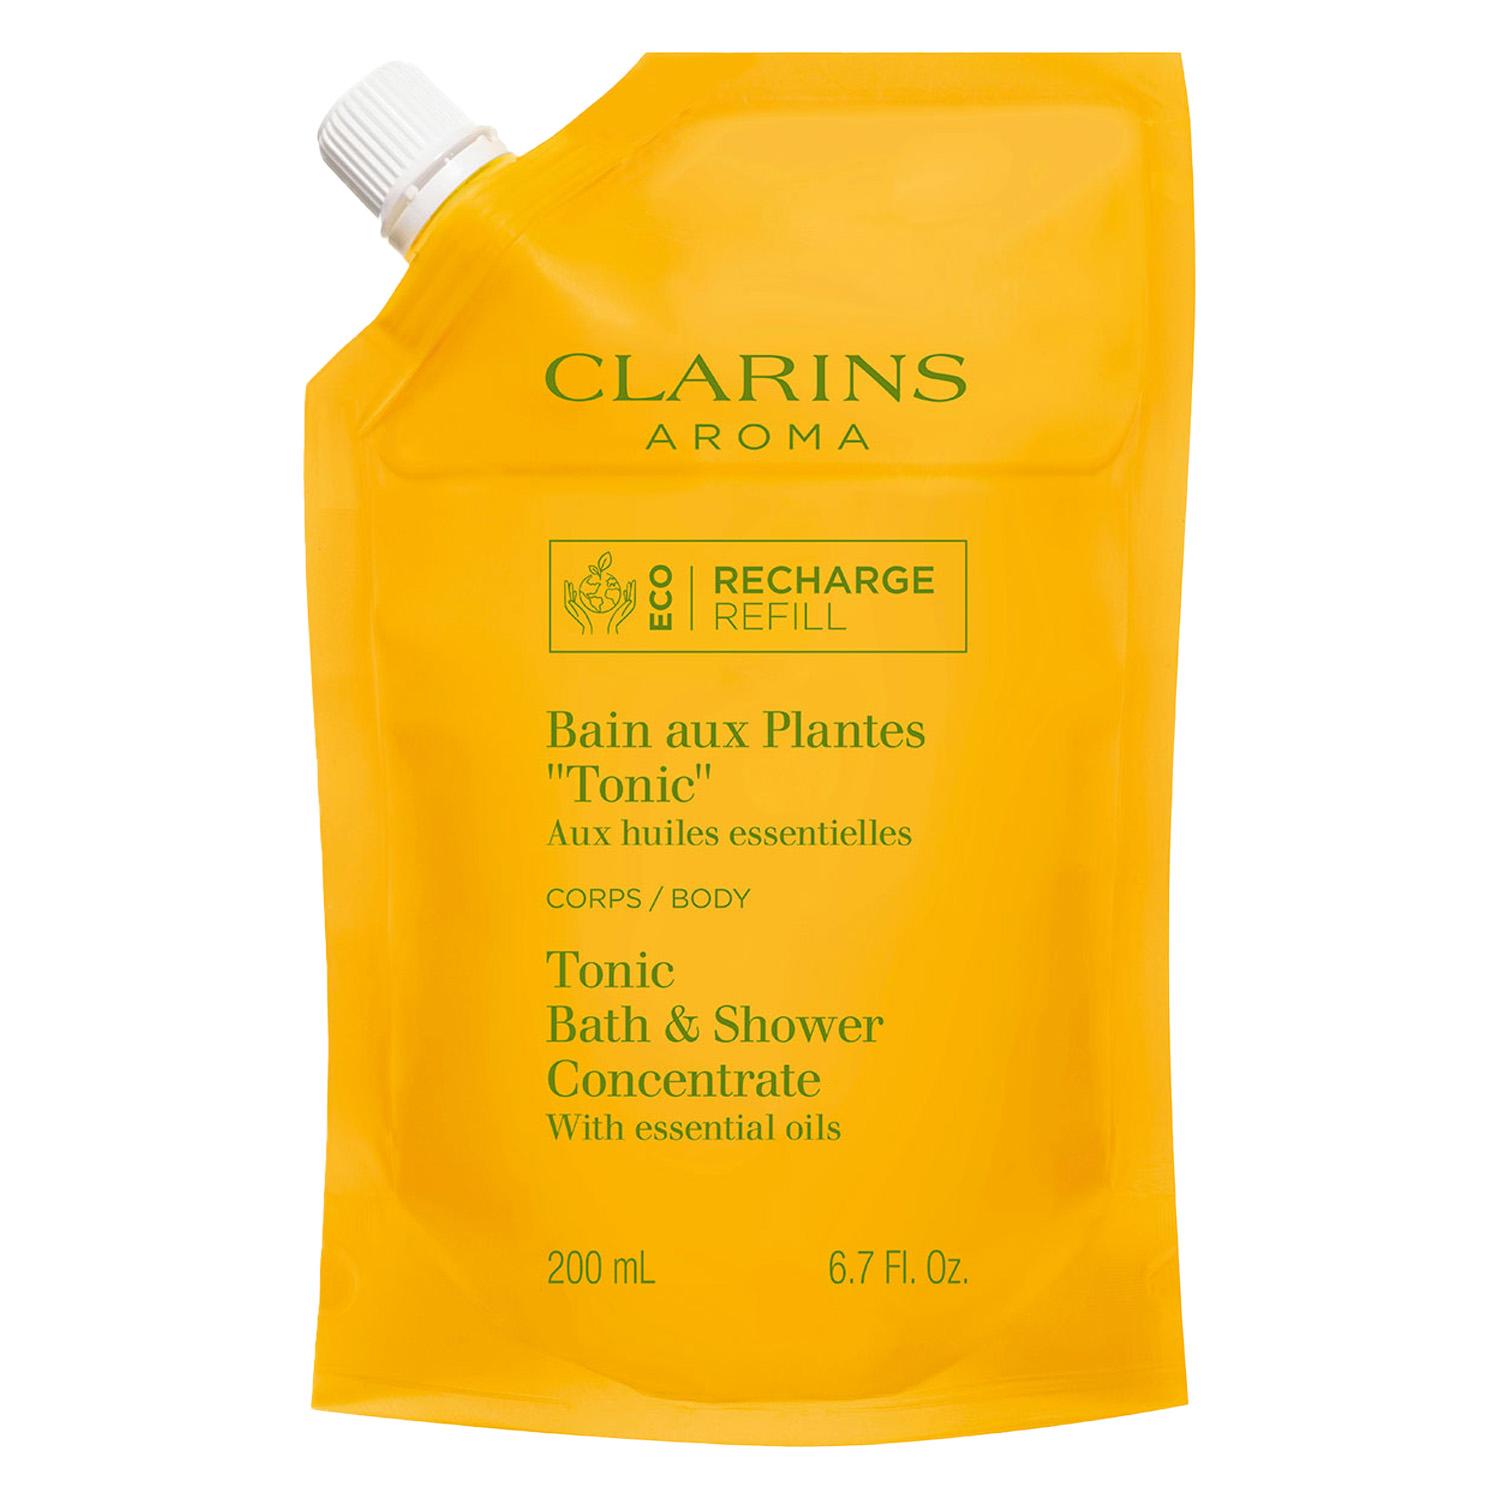 Clarins Body - Tonic Bath & Shower Concentrate Refill